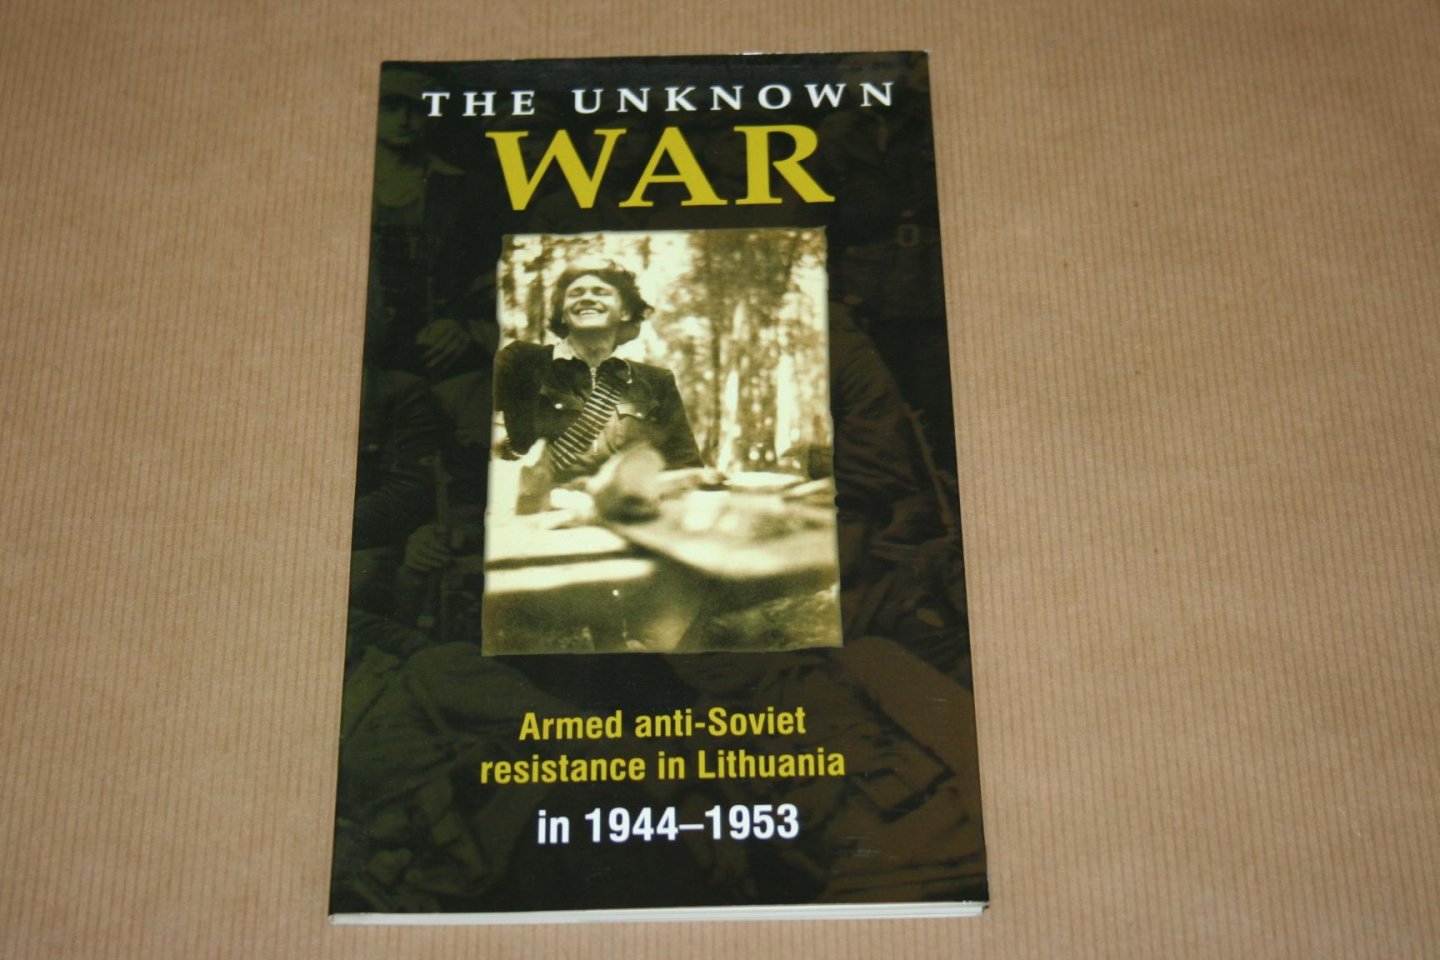 Kuodyté & Tracevskis - The unknown war  -- Armed anti-Soviet resistance in Lithuania  in 1944-1953